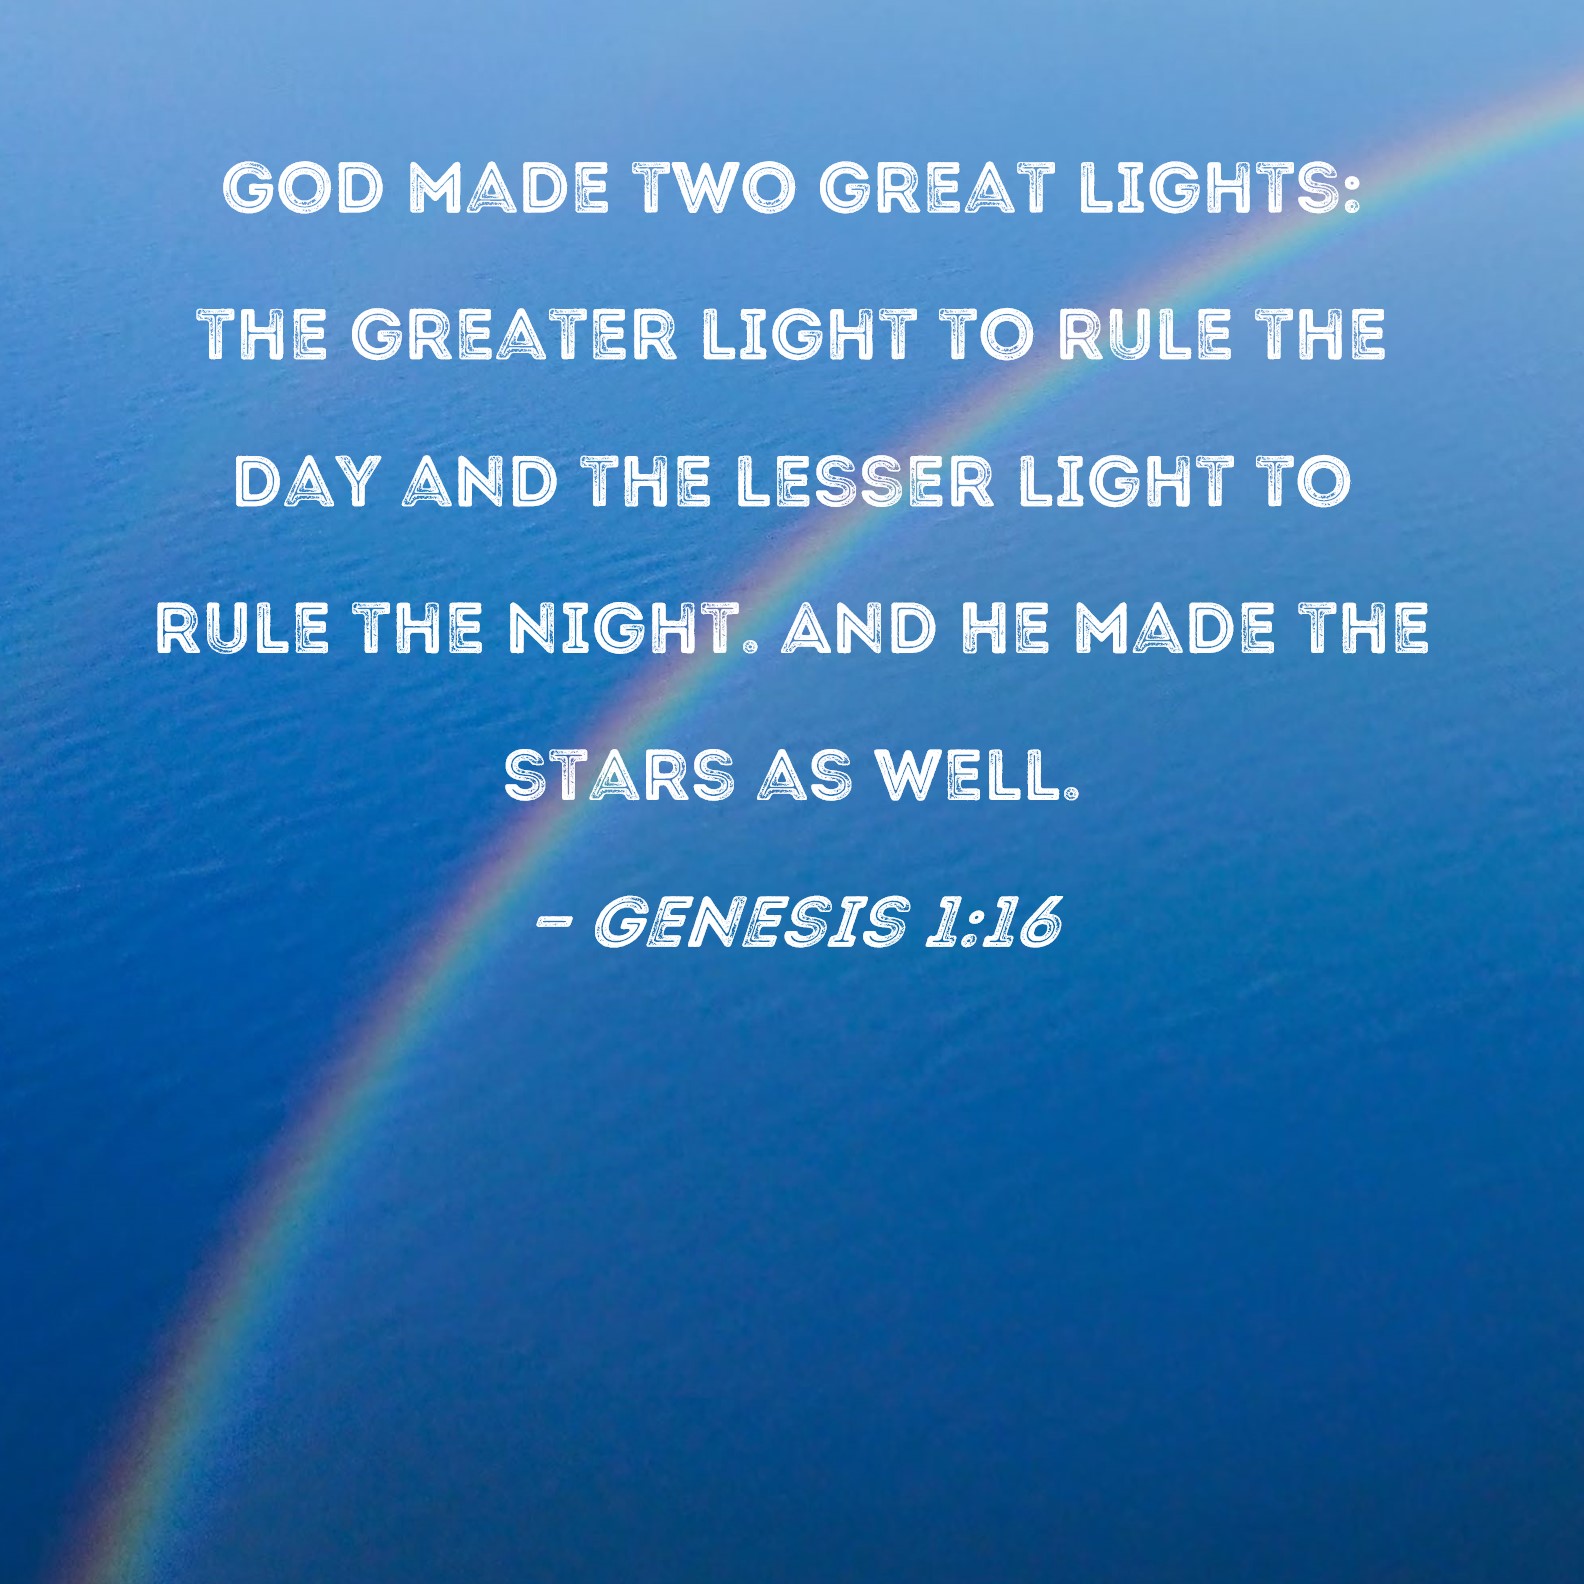 Genesis 1:16 God made two great lights: the greater light to rule the day  and the lesser light to rule the night. And He made the stars as well.